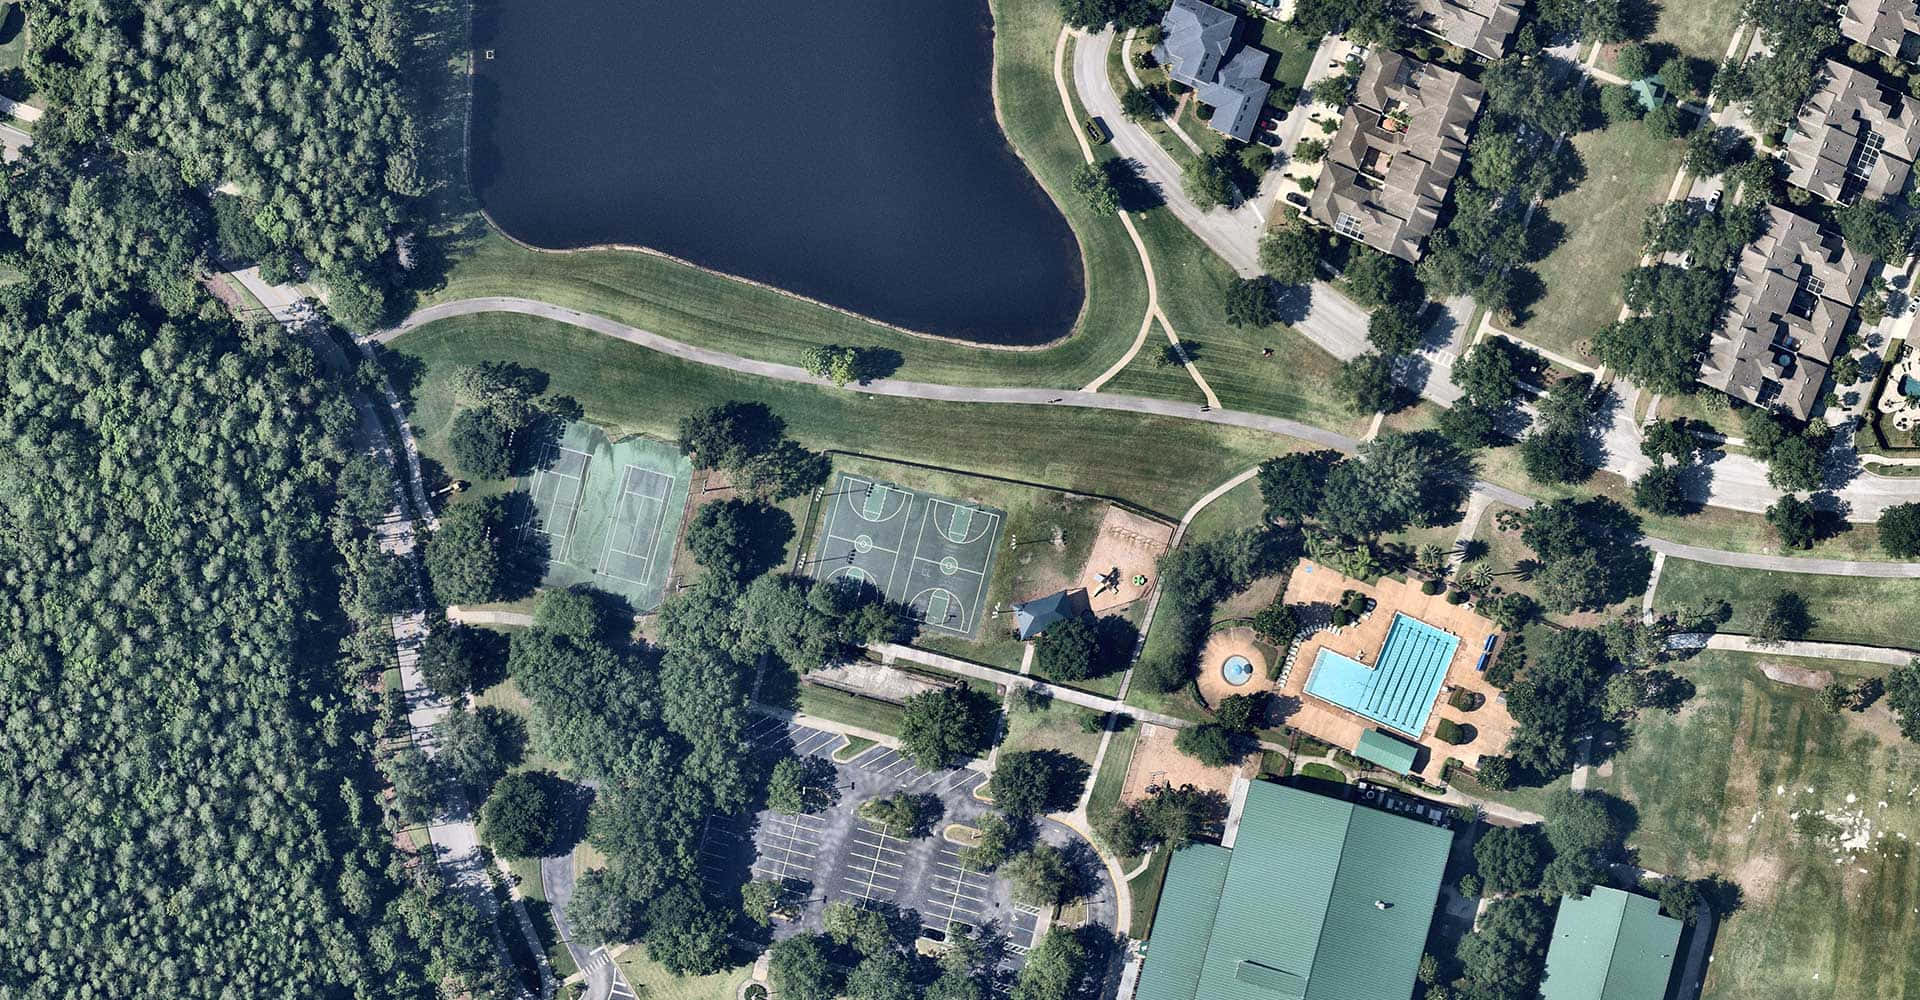 Floridafirma Flygfoto (context: A Possible Caption For A Wallpaper Featuring An Aerial View Of A Florida-based Company's Headquarters)